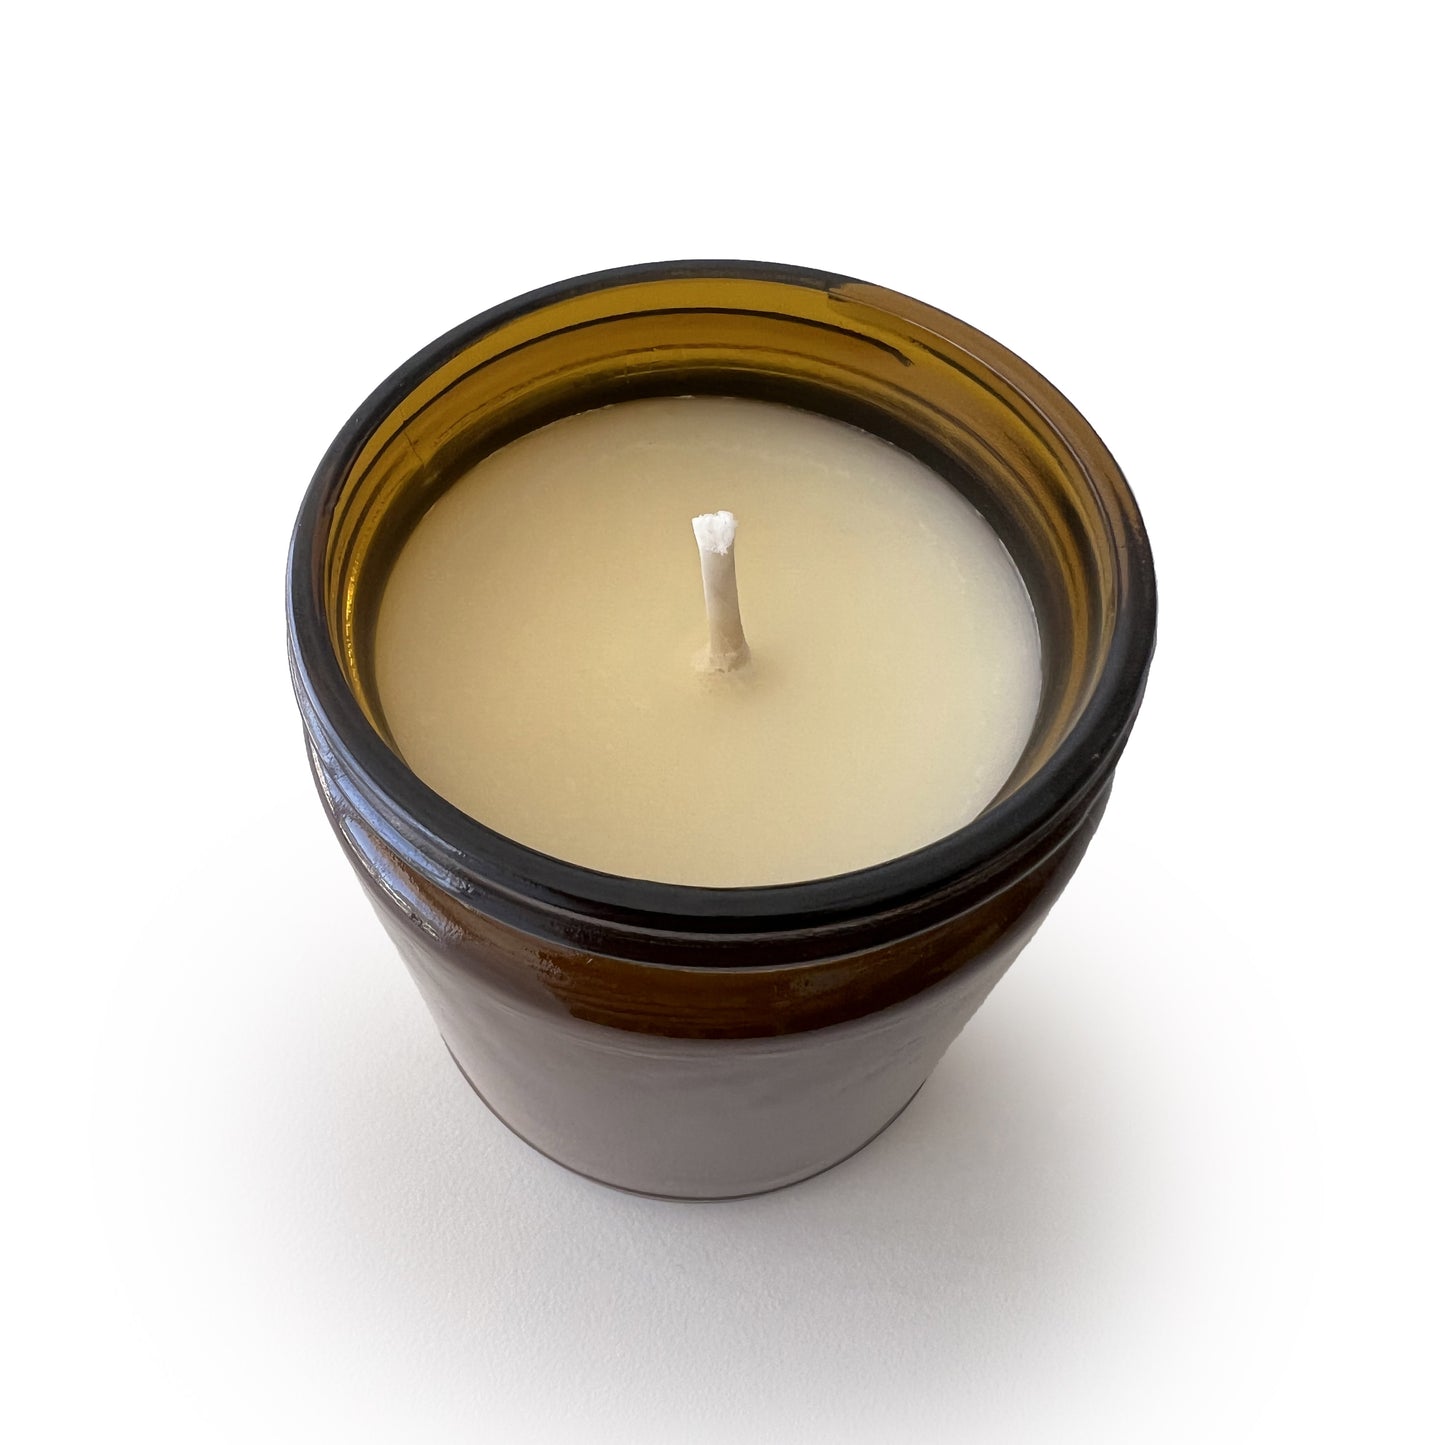 Fresh Allergies - Soy Candle 9oz